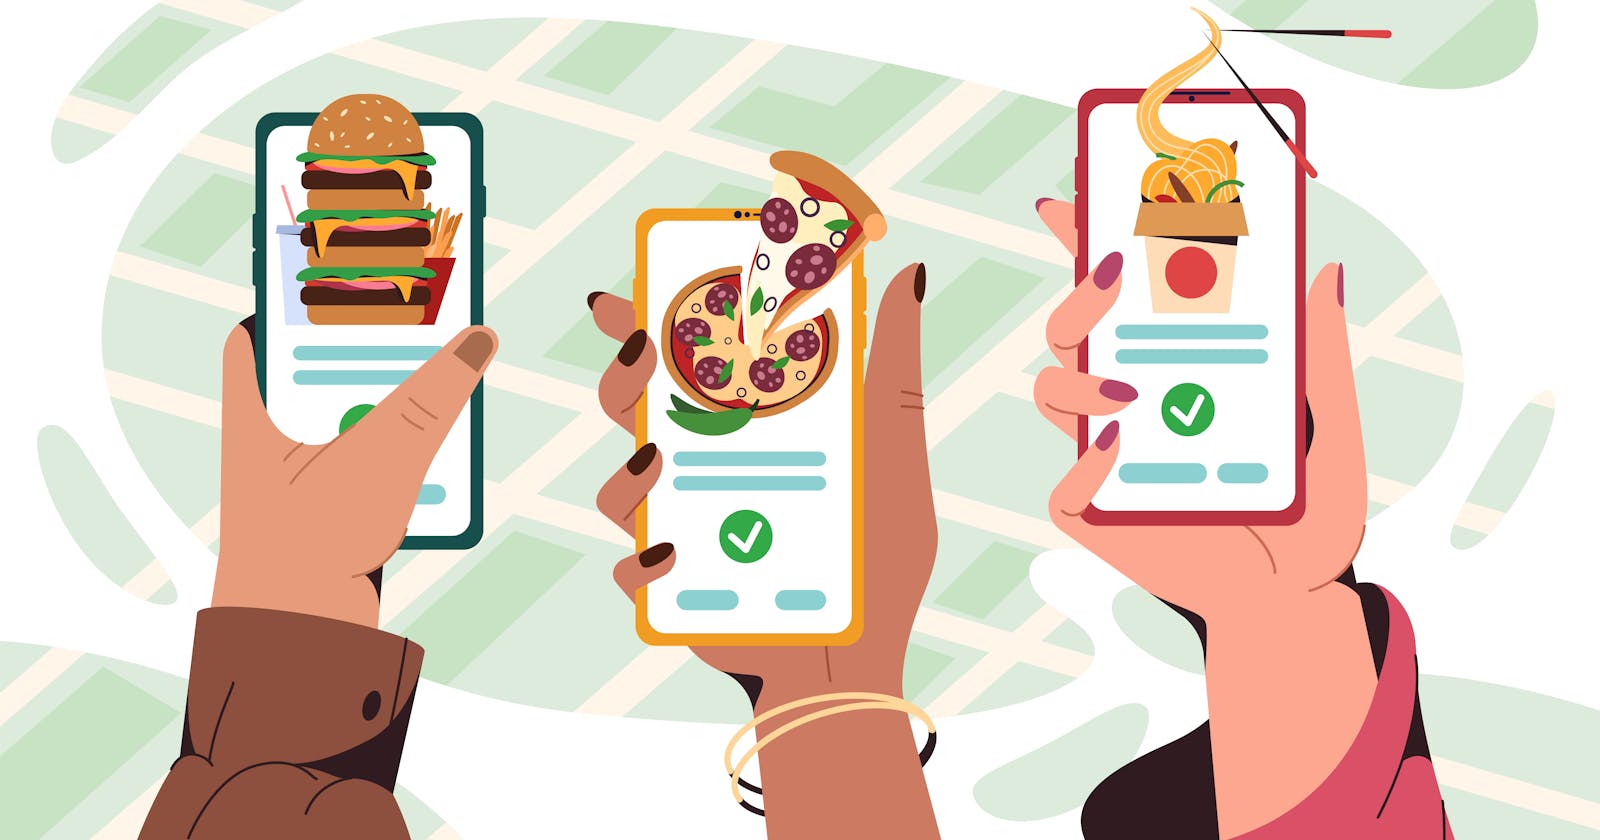 How To Build a Food Delivery App: Step-By-Step Guide